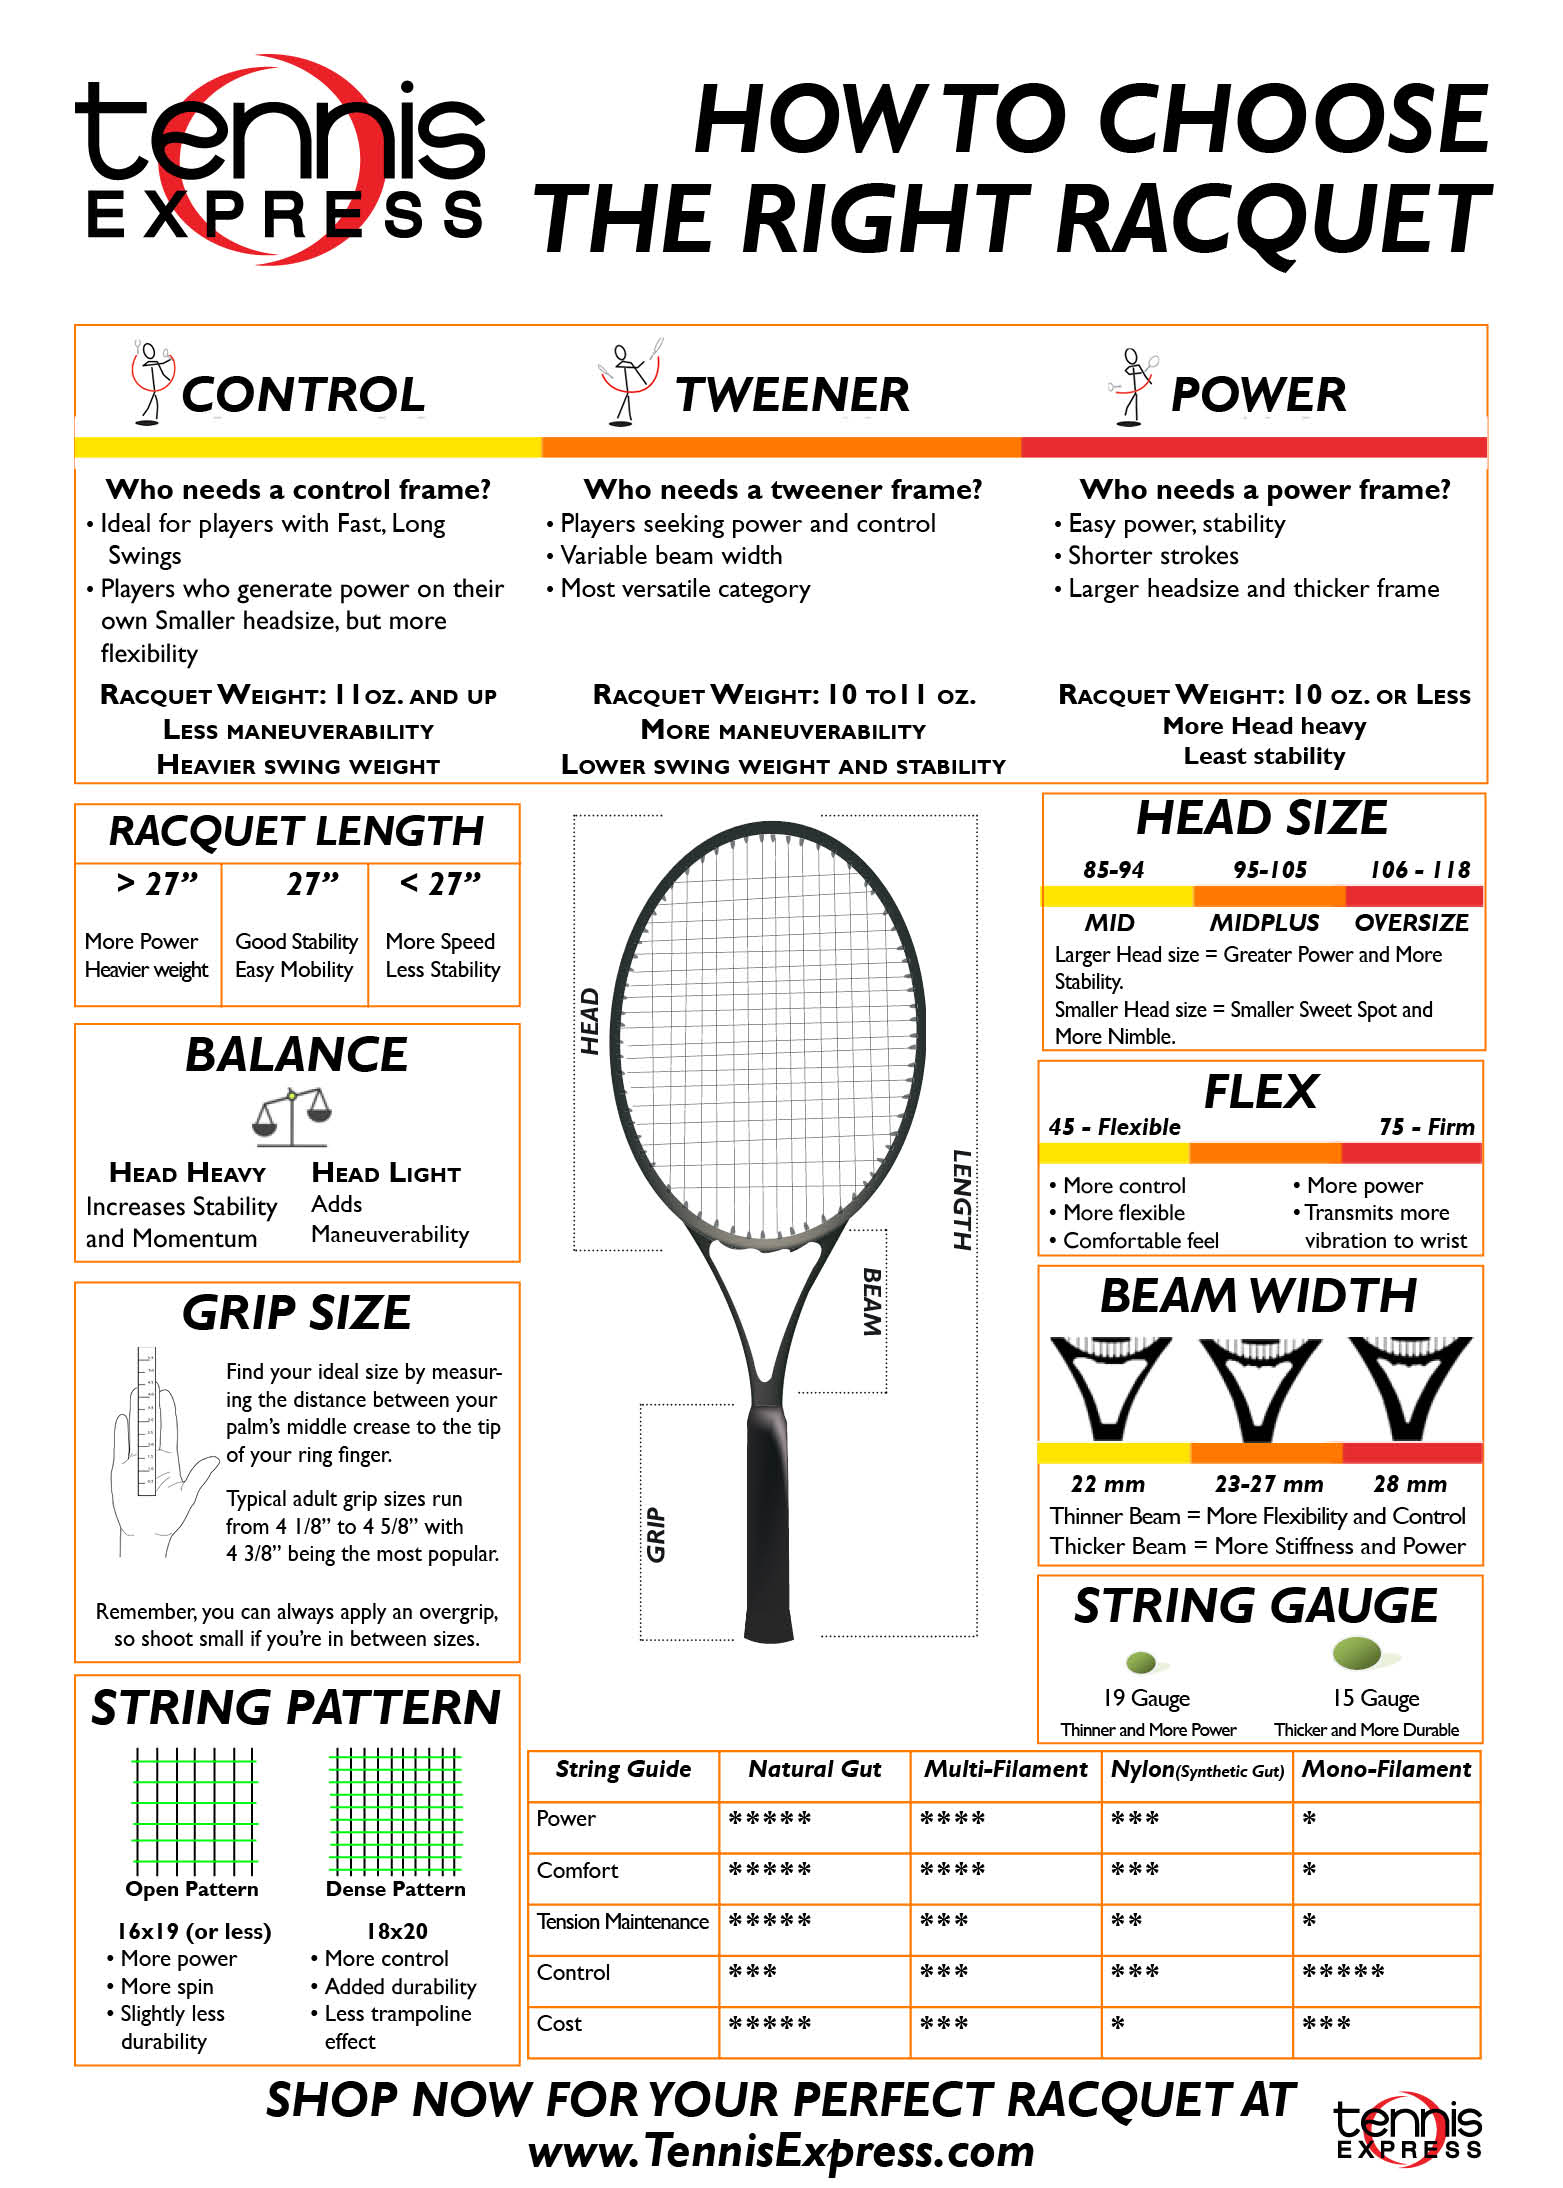 womens tennis racket size guide for Sale,Up To OFF 72%